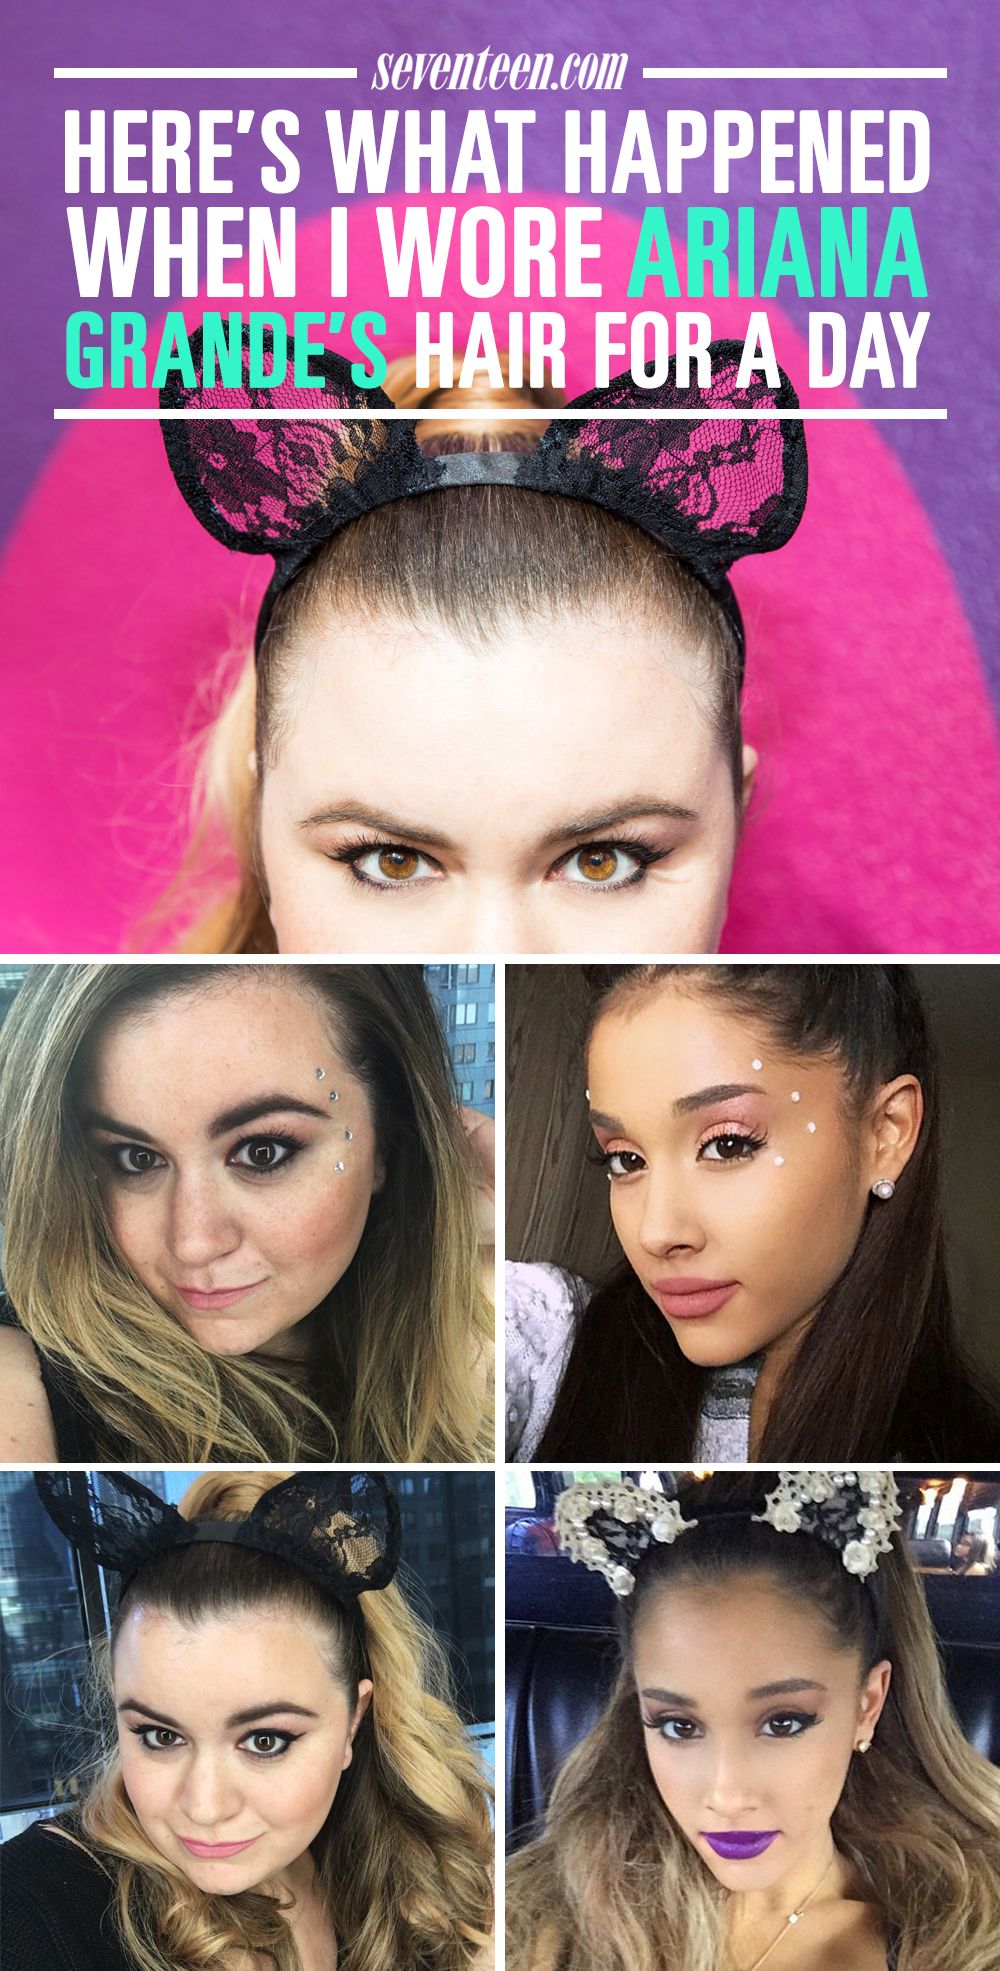 I Wore Ariana Grande's Hair for a Day and This is What Happened